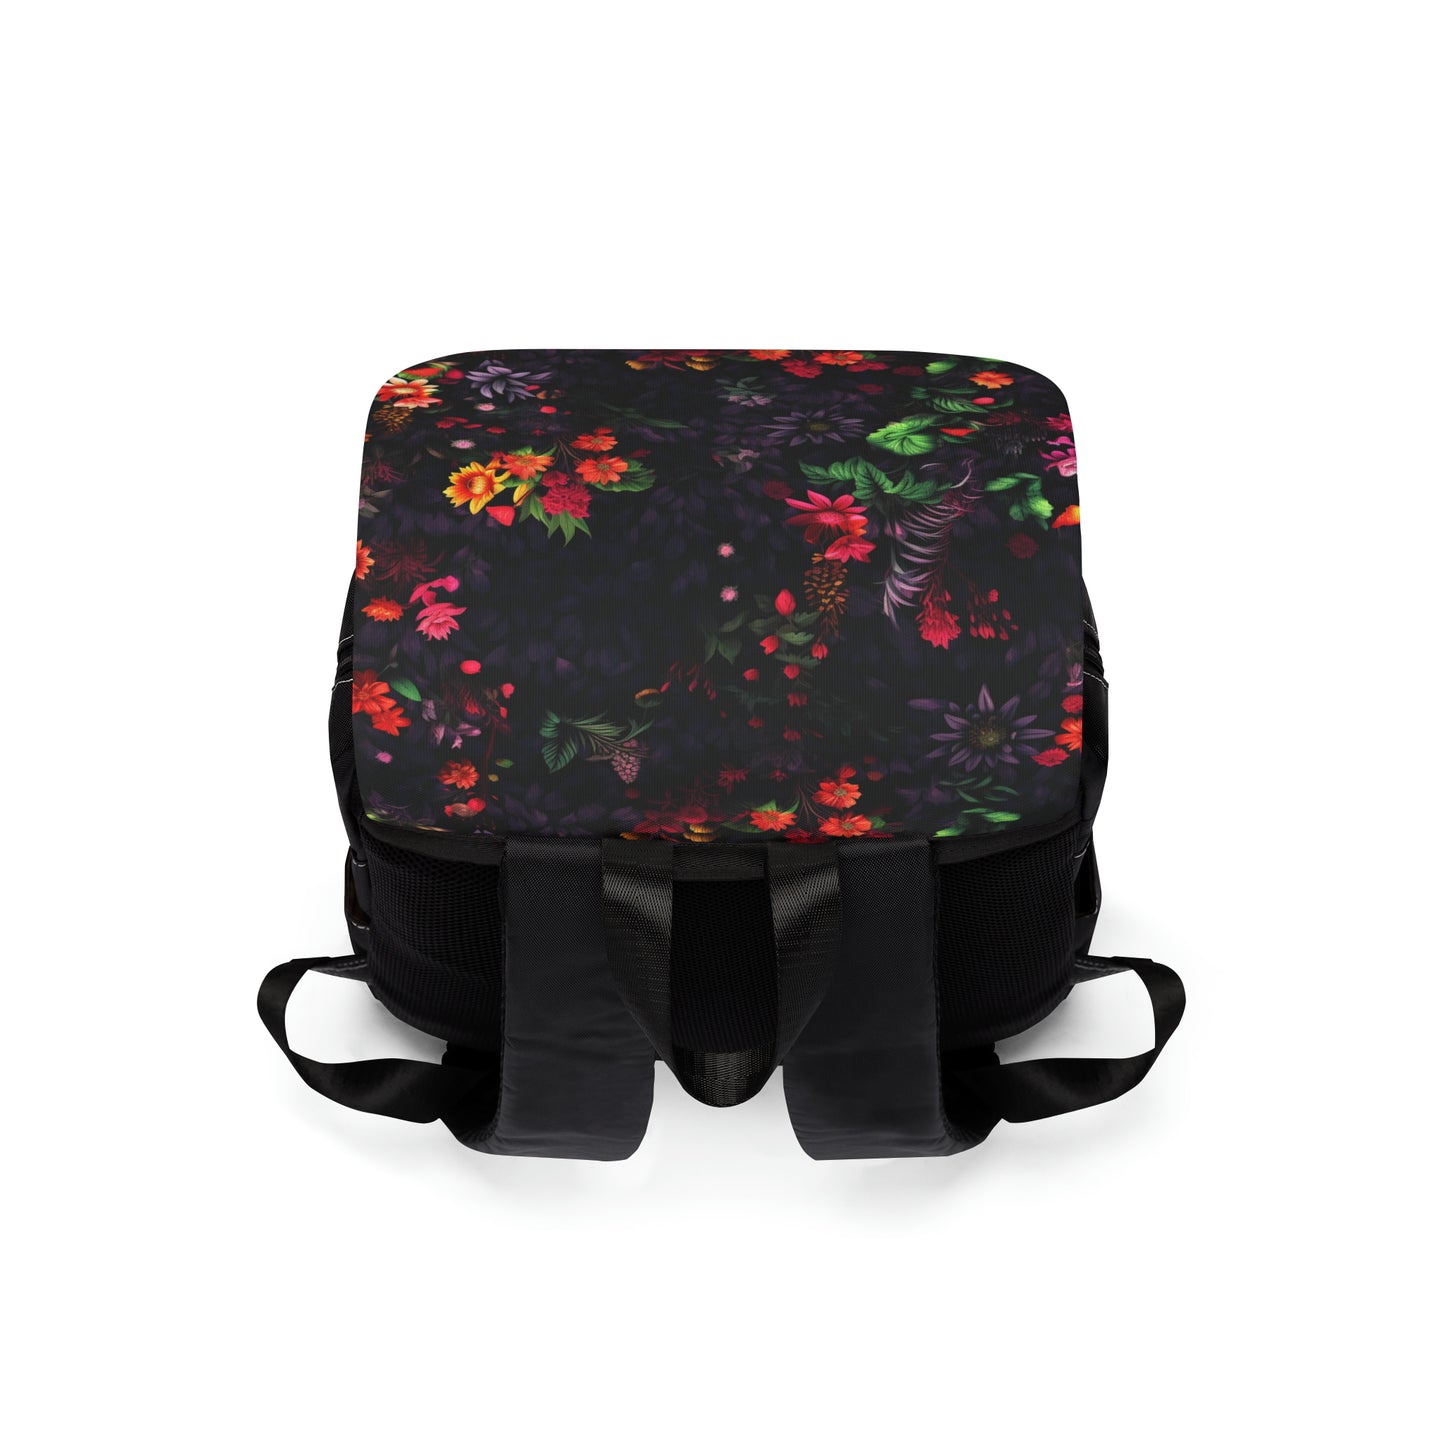 Neduz Designs Artified Floral Print Unisex Casual Shoulder Backpack - Durable and Stylish